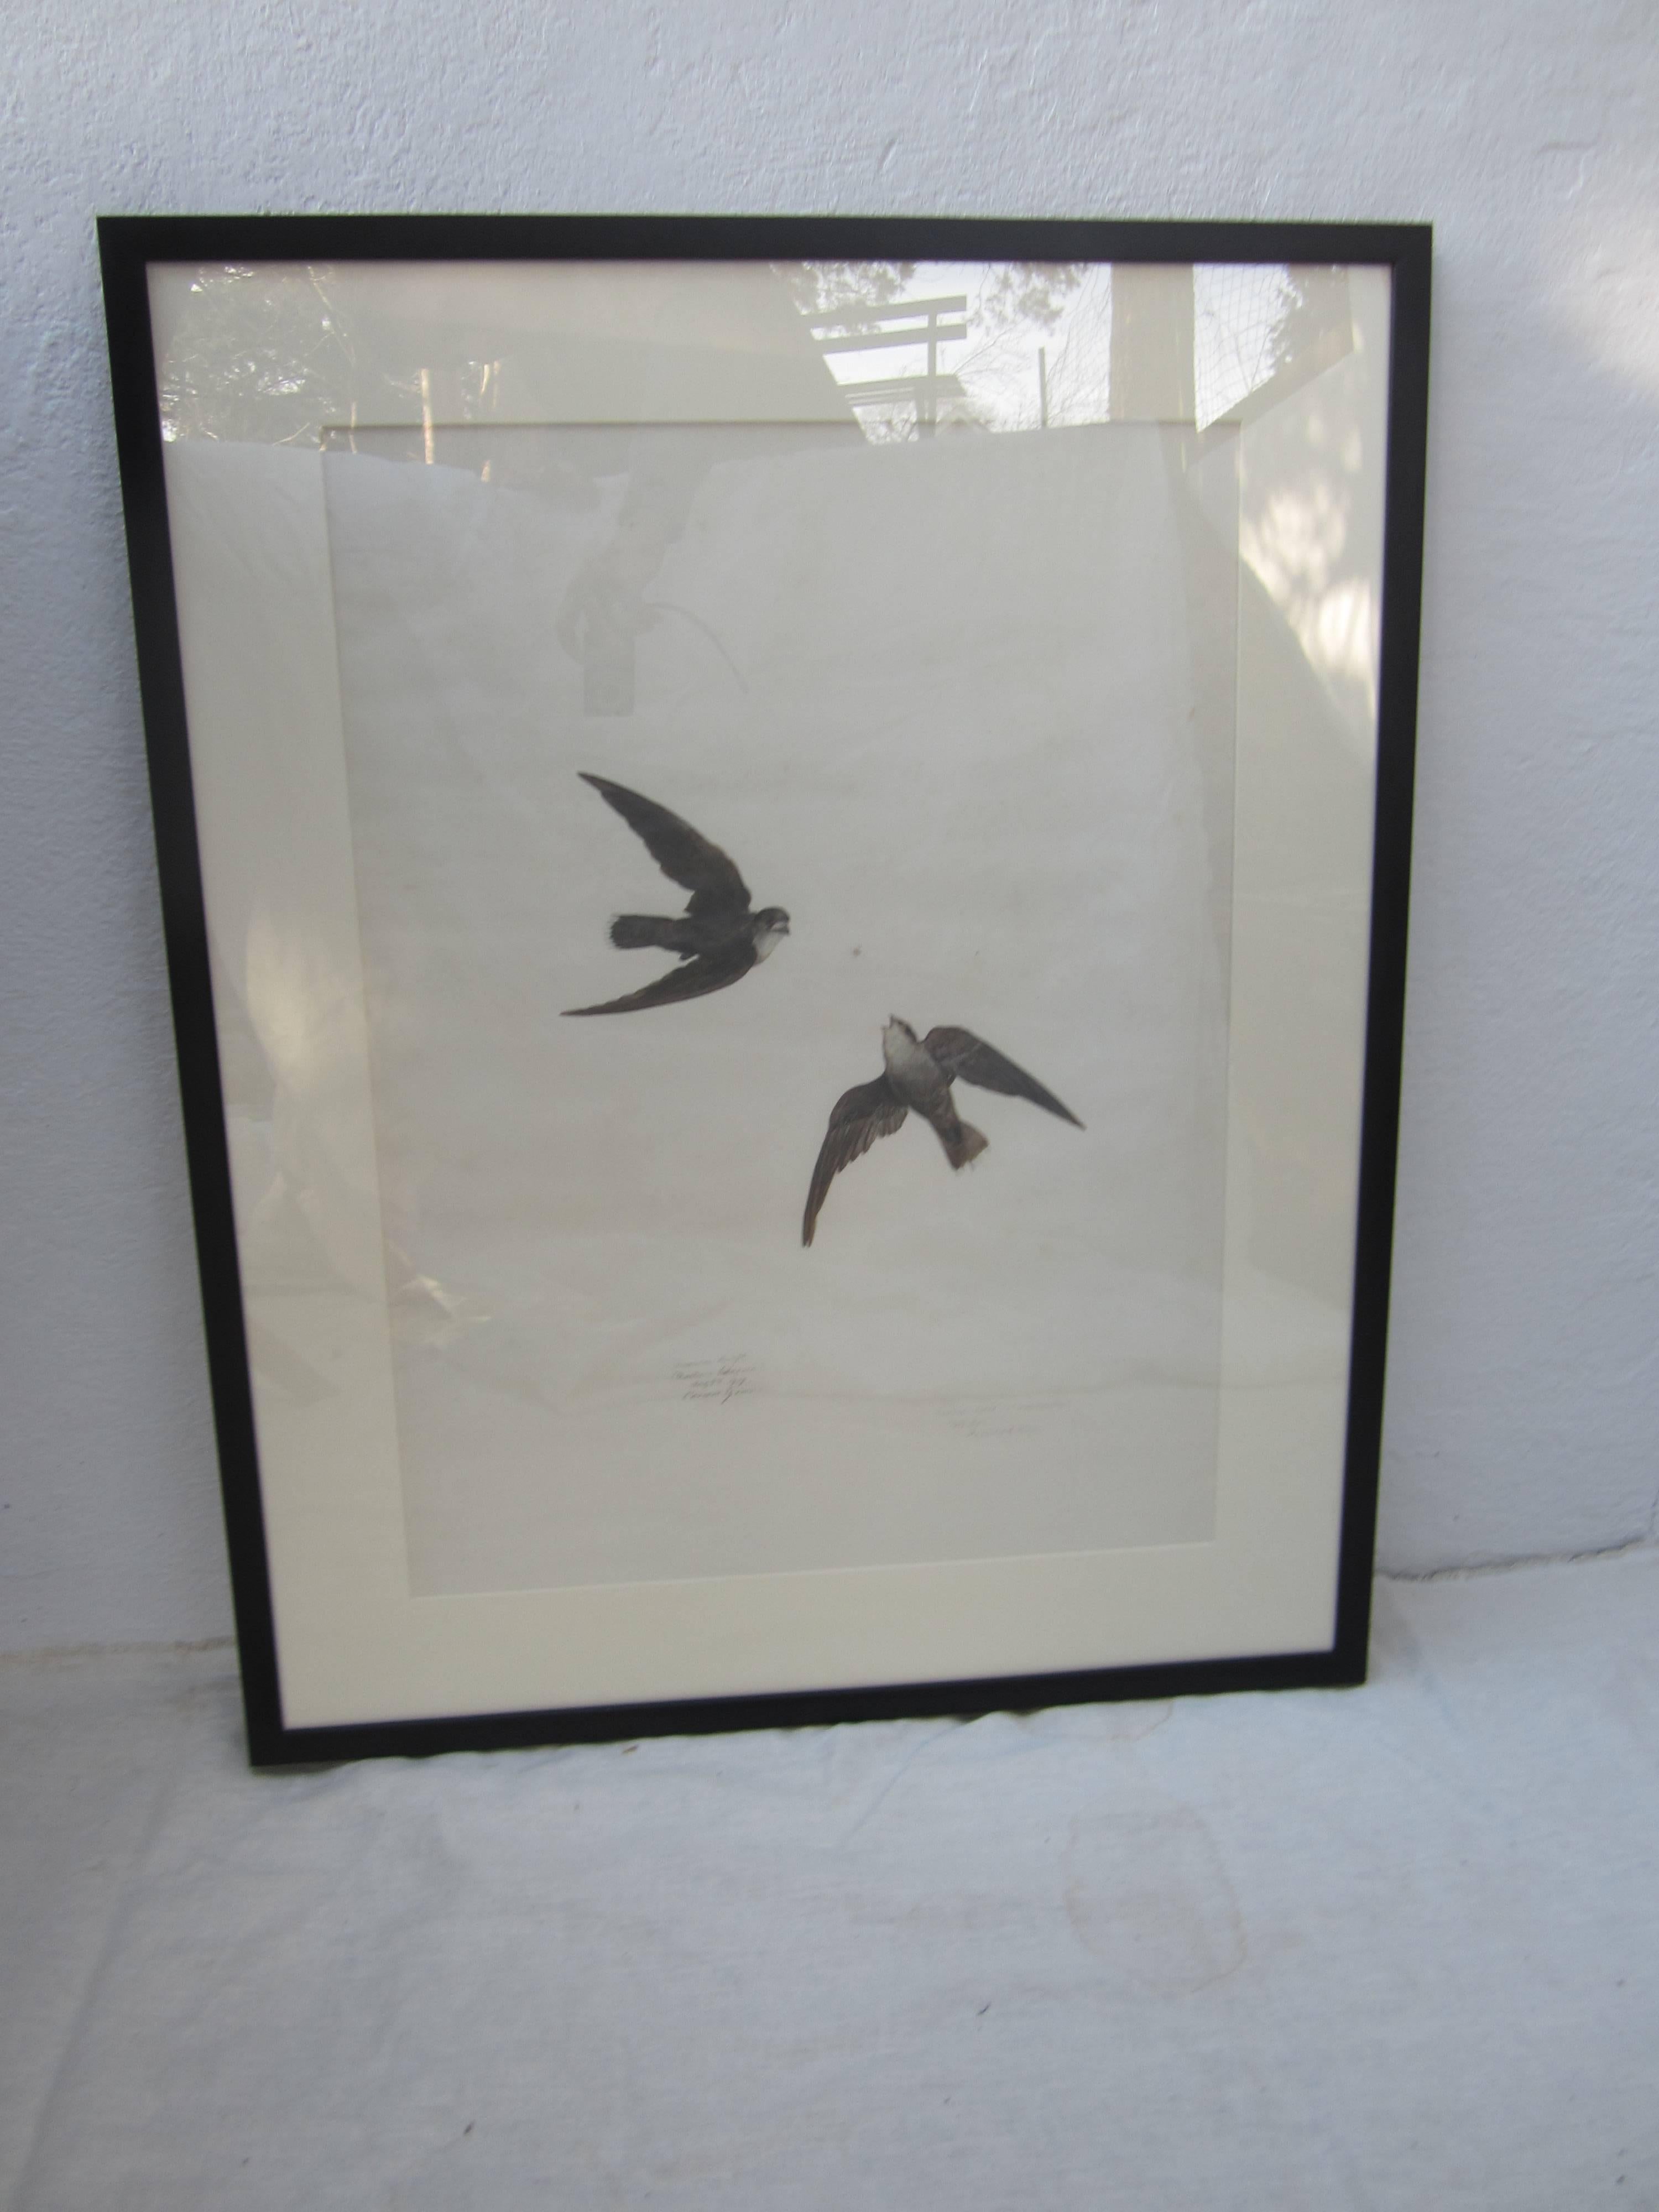 American swift (Chaetura Pelagica) print by Carroll Sargent Tyson, Jr. (1878-1956)

Signed and dated 1919.